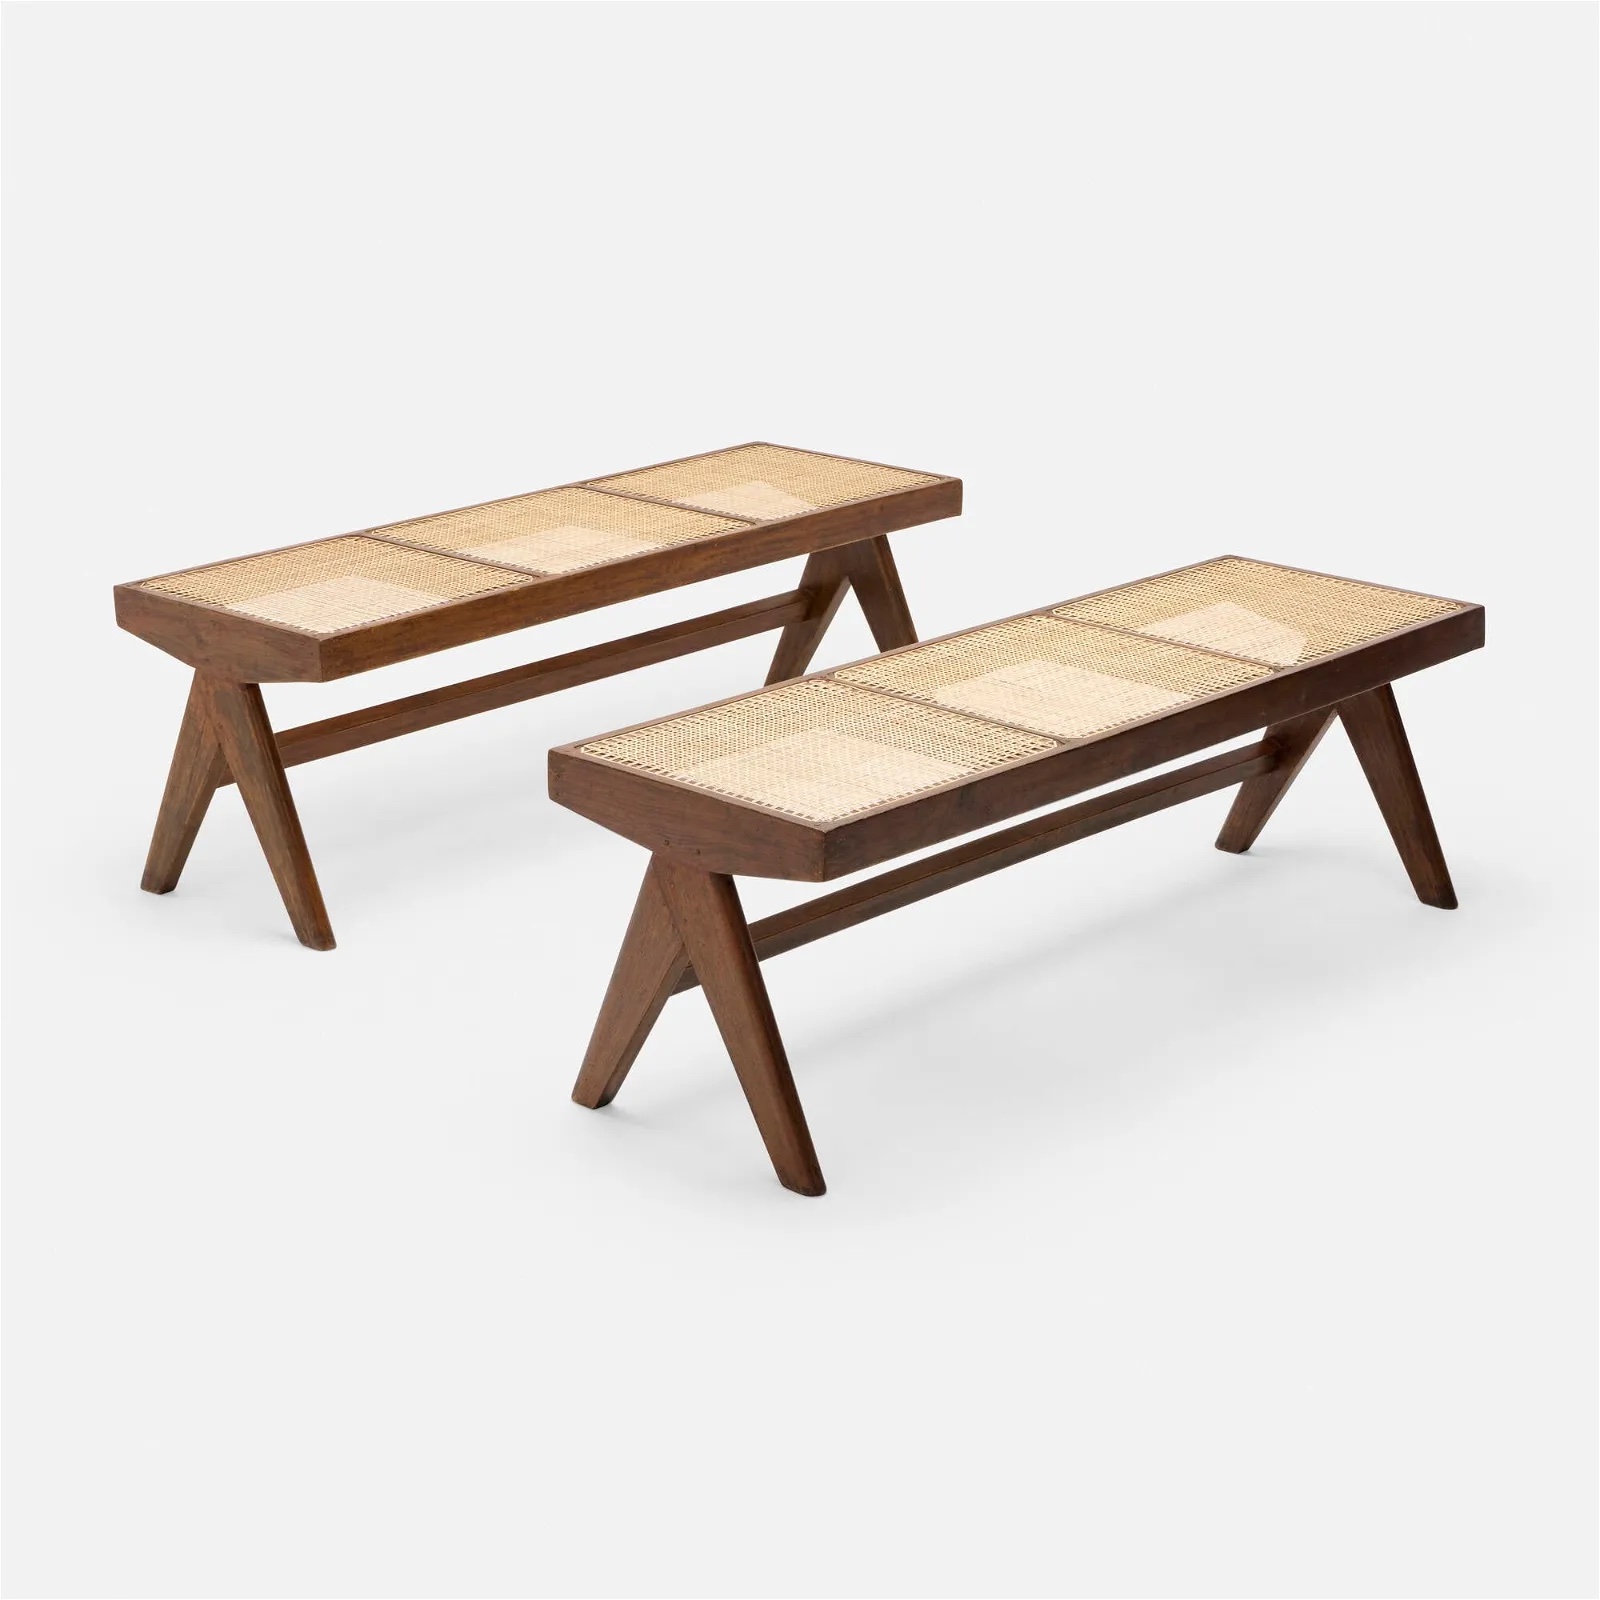 Pierre Jeanneret, benches from the M.L.A. Flats building, Chandigarh, India, estimated at $12,000-$15,000 at Wright.
